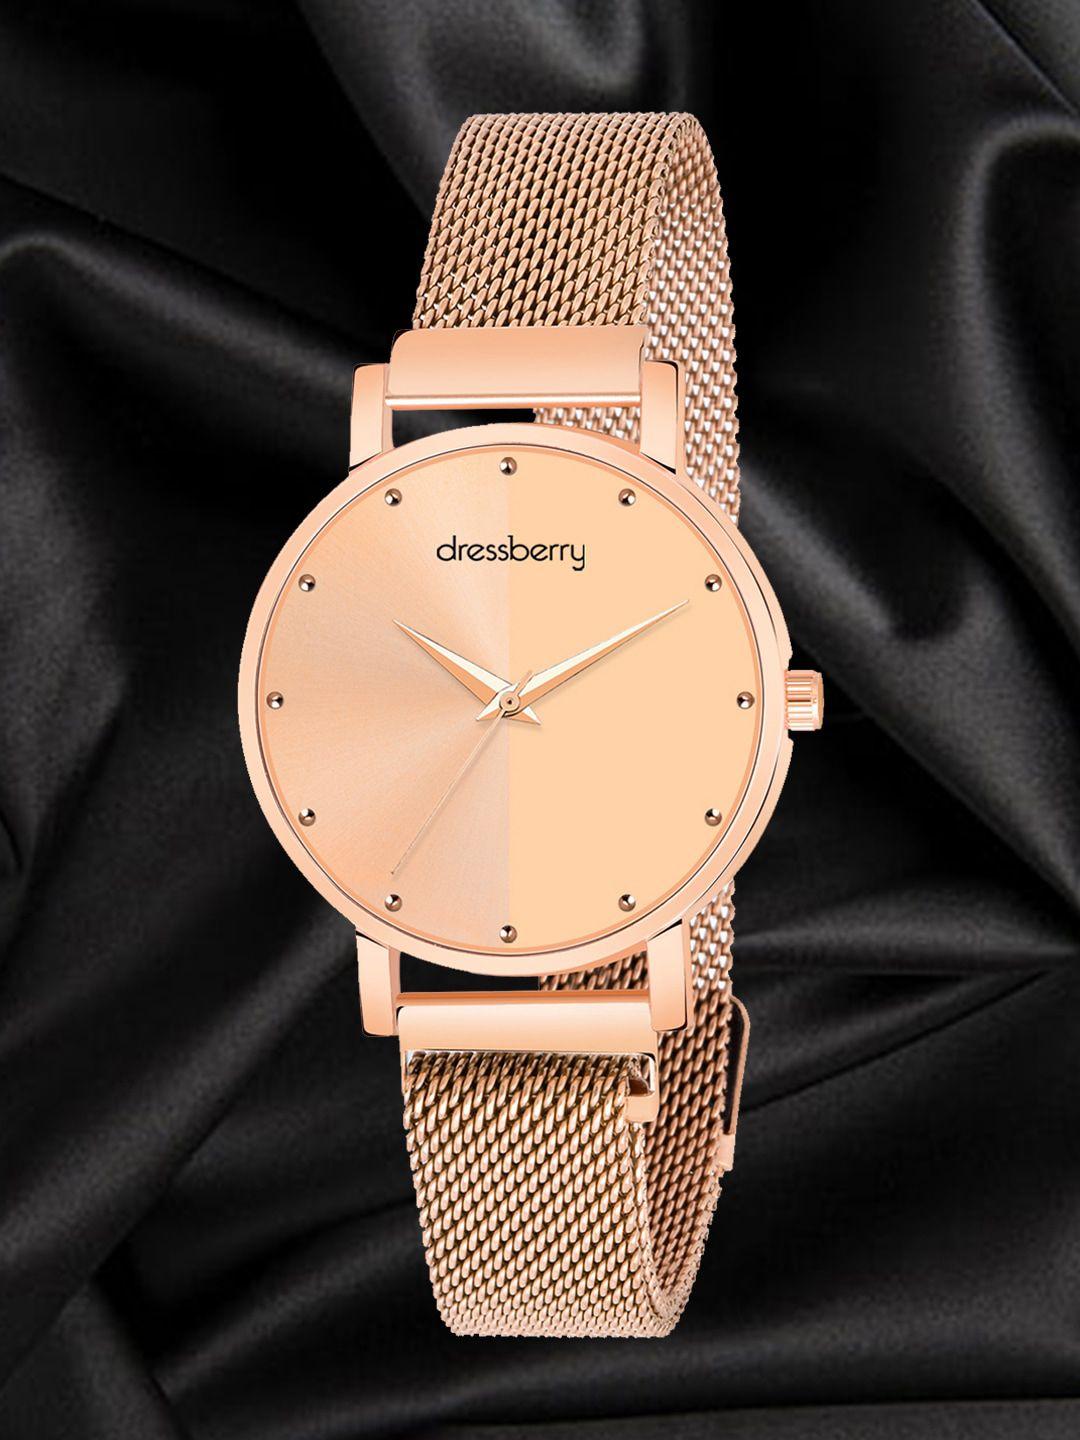 dressberry women rose gold-toned water resistance analogue watch hobdb-172-rg